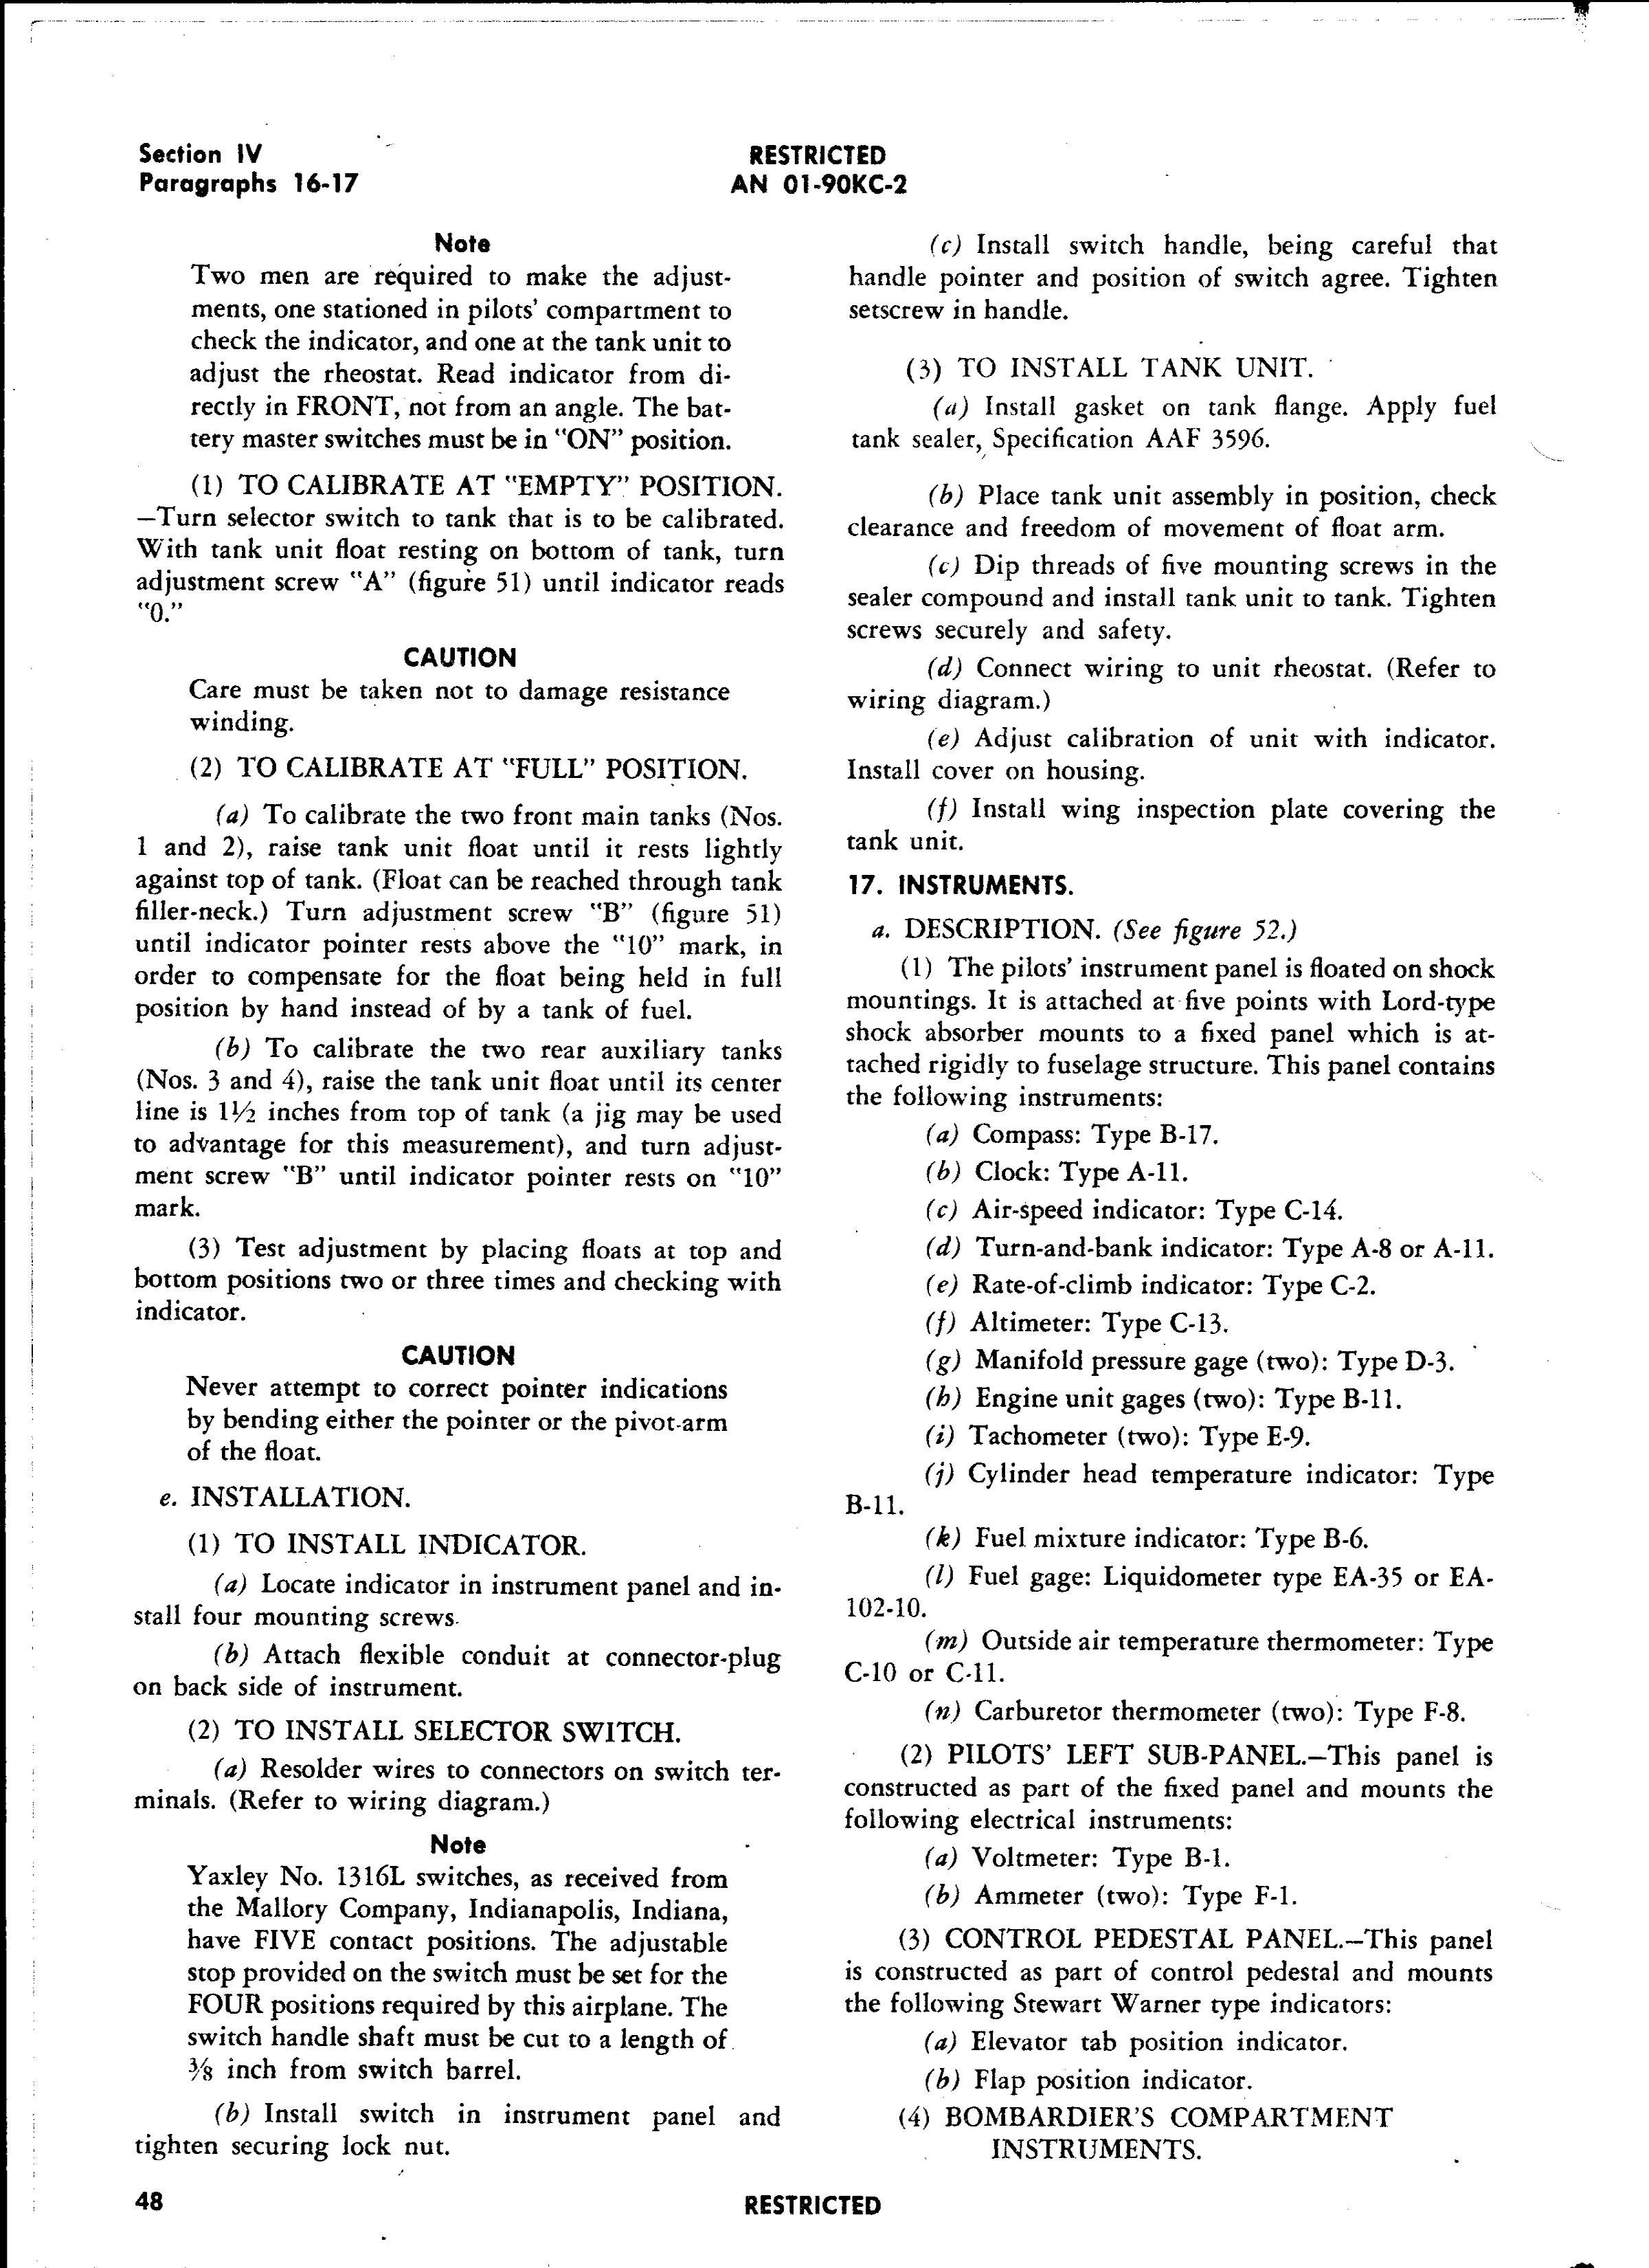 Sample page 53 from AirCorps Library document: Erection and Maintenance Instructions - AT-11 